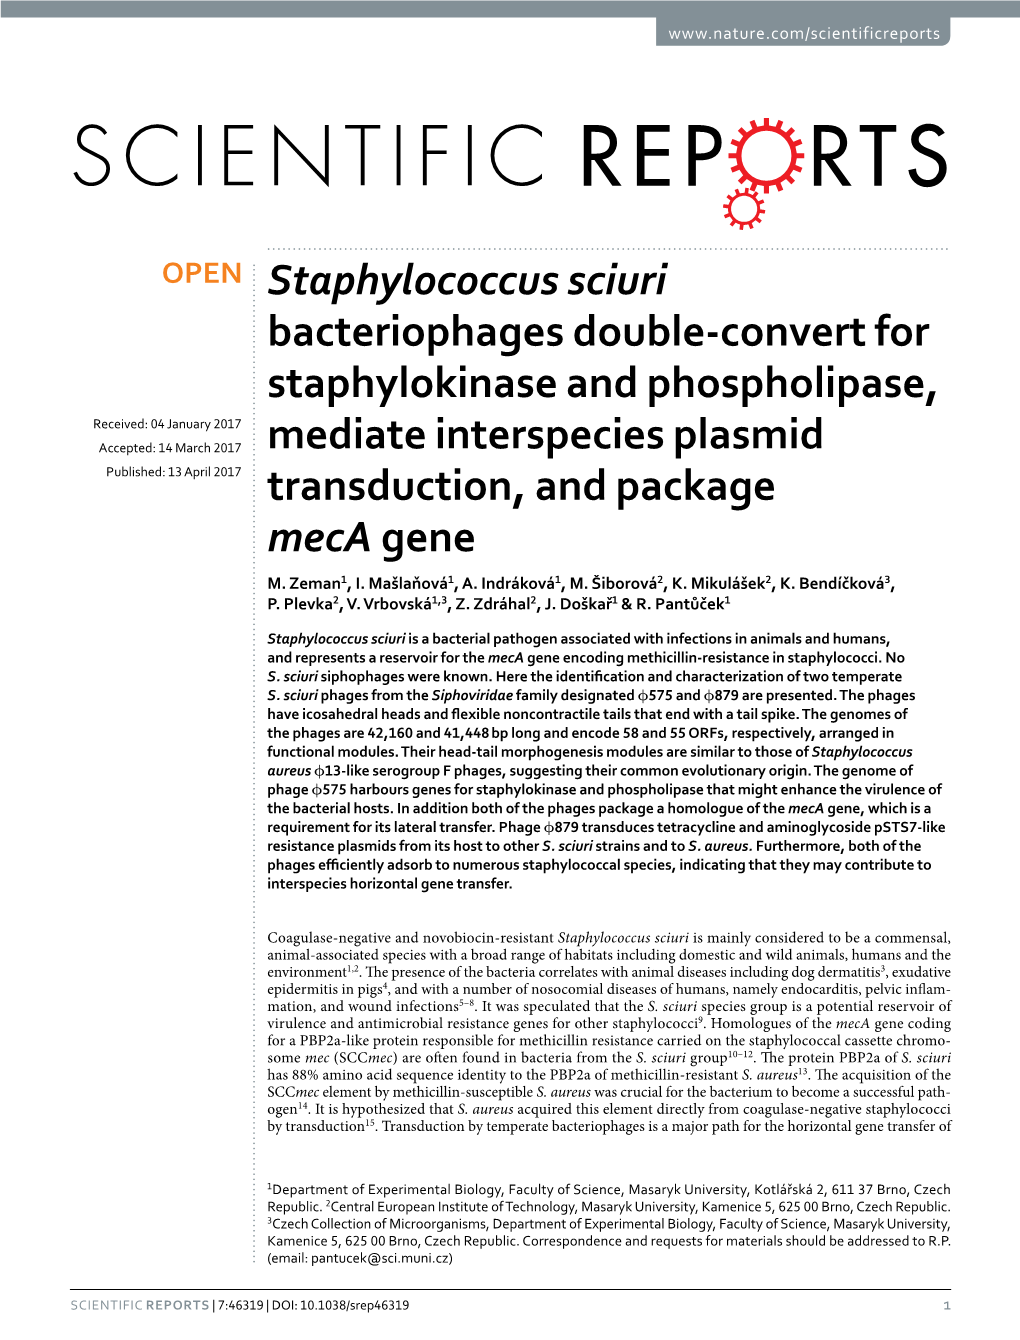 Staphylococcus Sciuri Bacteriophages Double-Convert for Staphylokinase